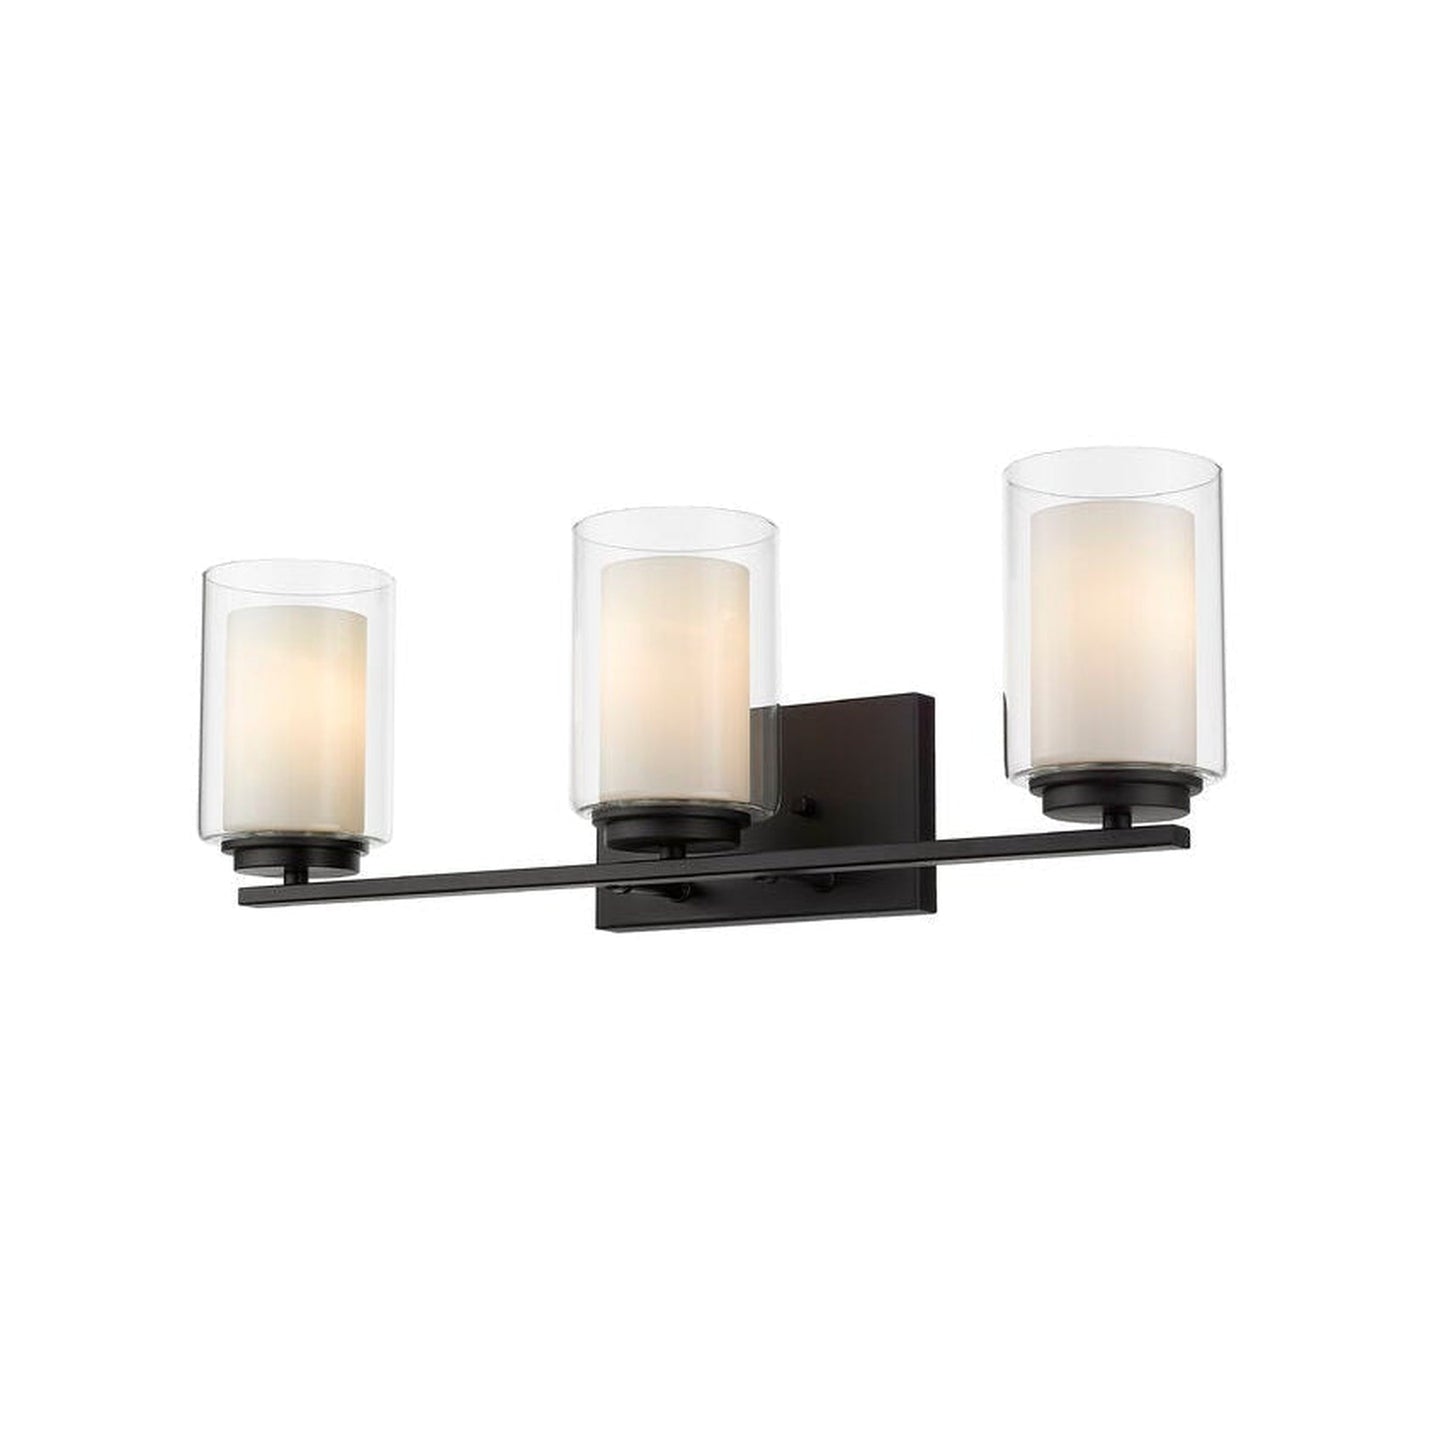 Z-Lite Willow 24" 3-Light Matte Black Vanity Light With Clear and Matte Opal Glass Shade